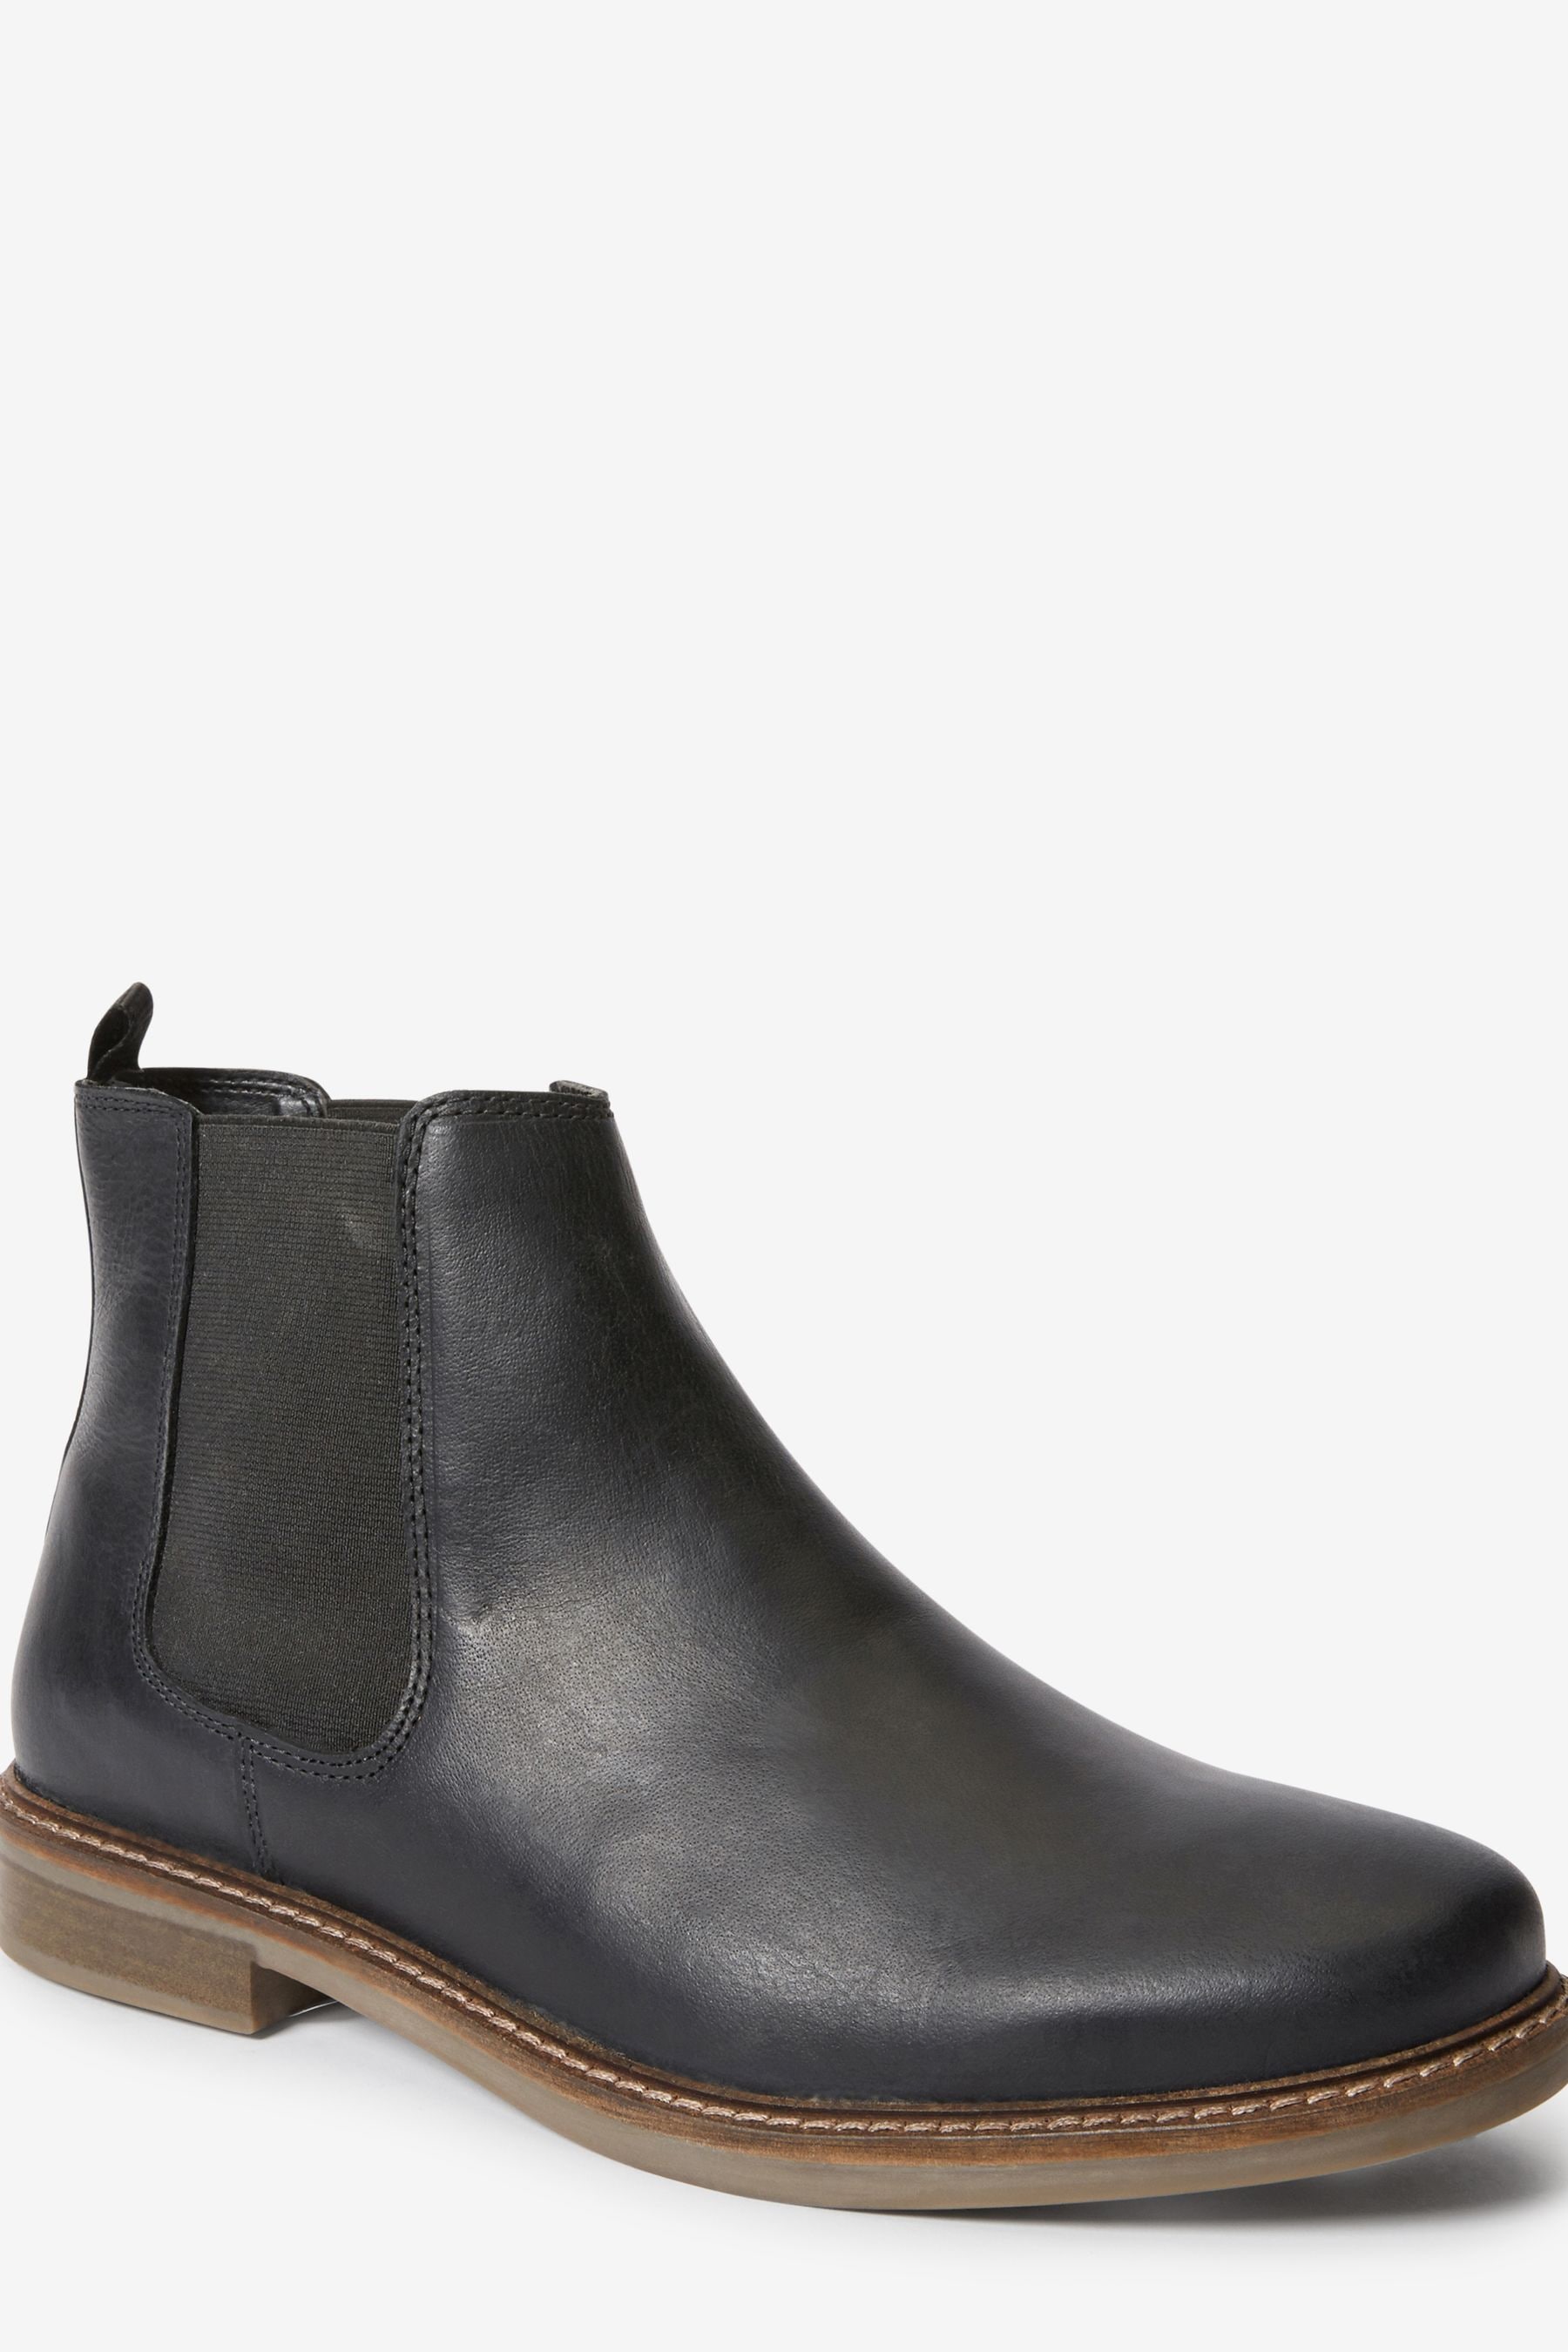 Buy Black Waxy Finish Leather Chelsea Boots from the Next UK online shop